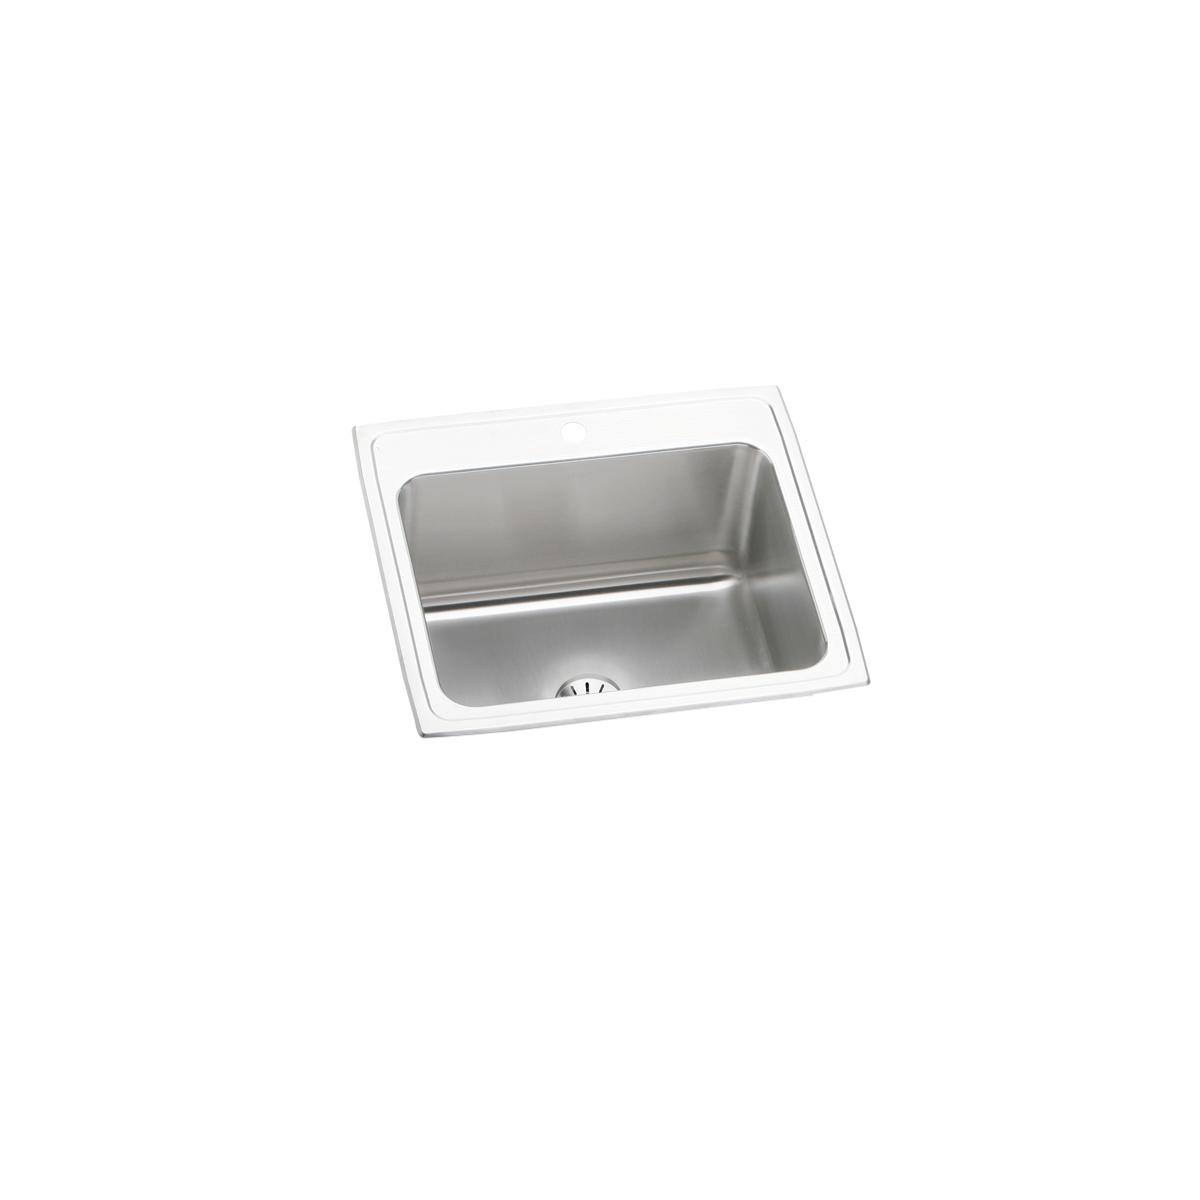 Elkay Lustertone Classic 25" x 22" x 10-3/8" Single Bowl Drop-in Sink with Perfect Drain